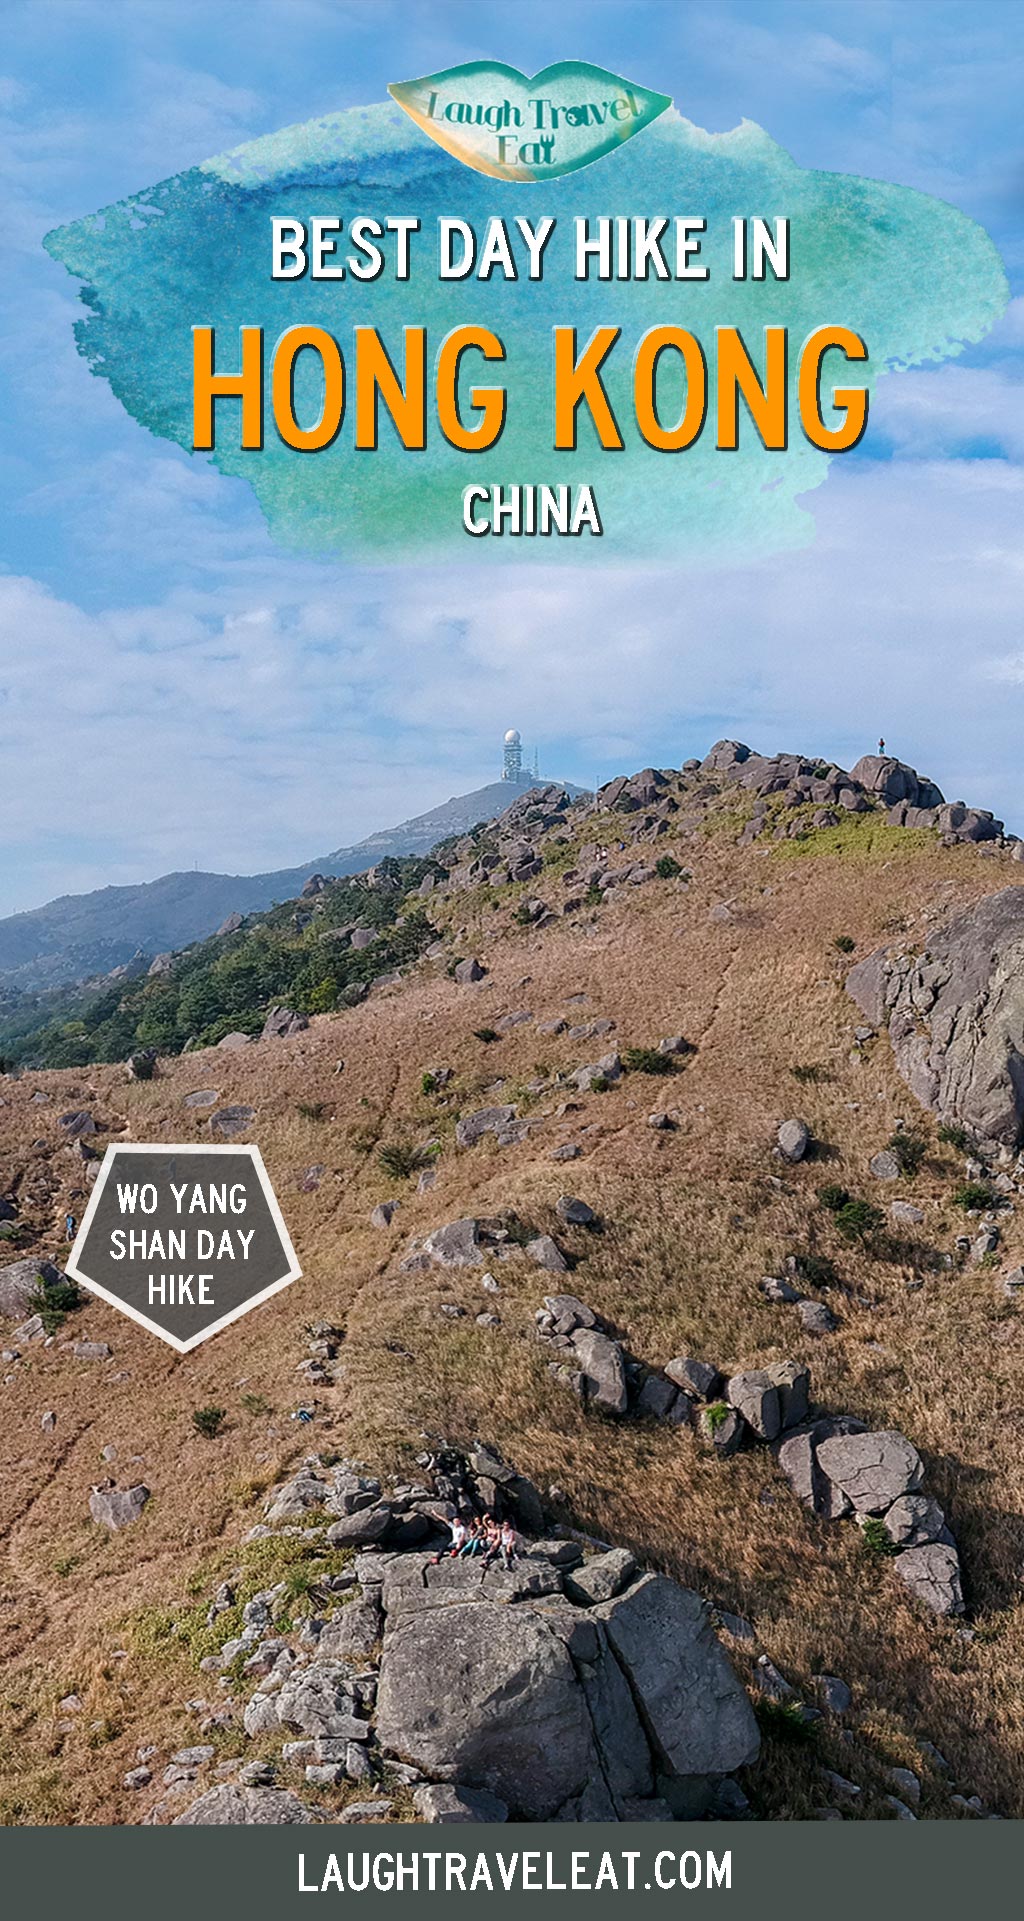 If you are seeking a dreamy hike without a crowd high up in the mountains, Wo Yang Shan is a long but worthwhile hike that’s perfect for an adventure. With giant rock outcrops, a view of Tai Mo Shan radar towers as well as the nearby cityscape and Shing Mun Reservoir, here is how to hike it: #HongKong #Hike #China